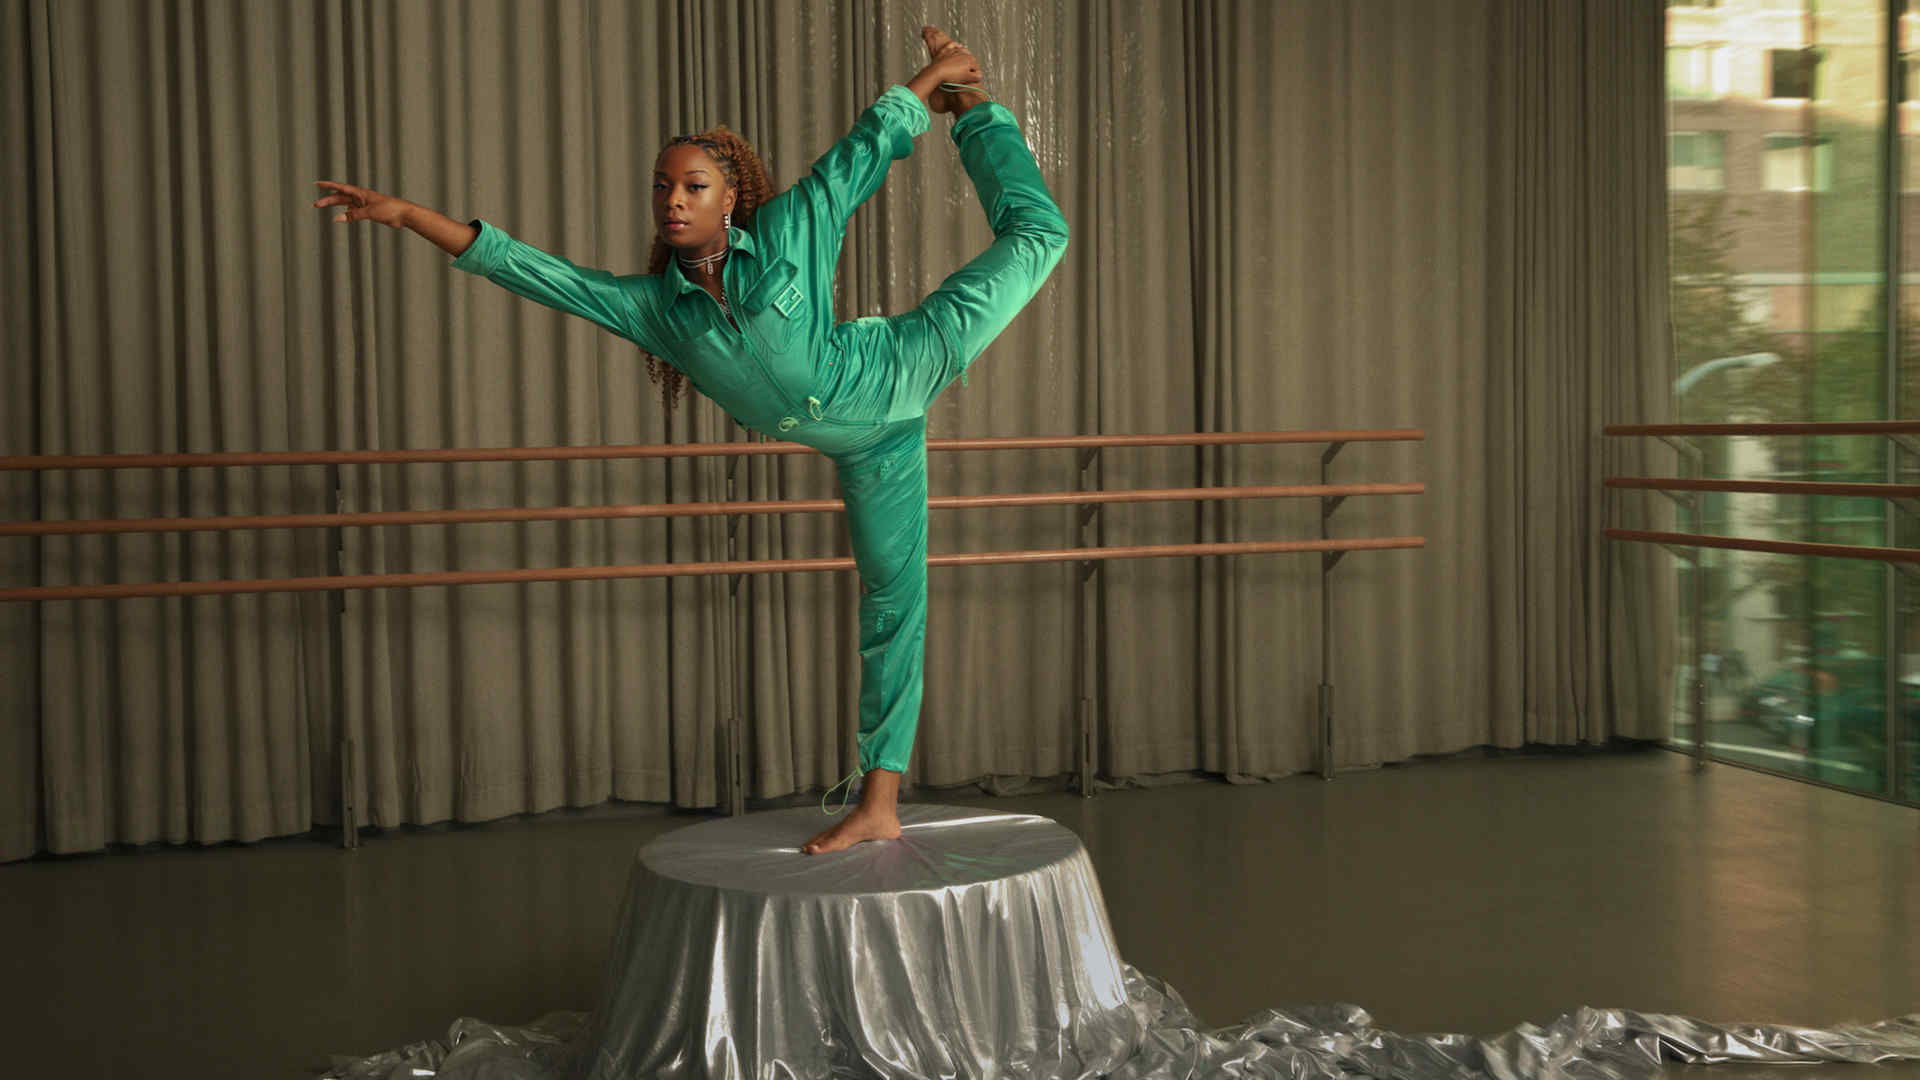 Raven Joseph dressed in a fashionable emerald green jumpsuit posing in a dance studio